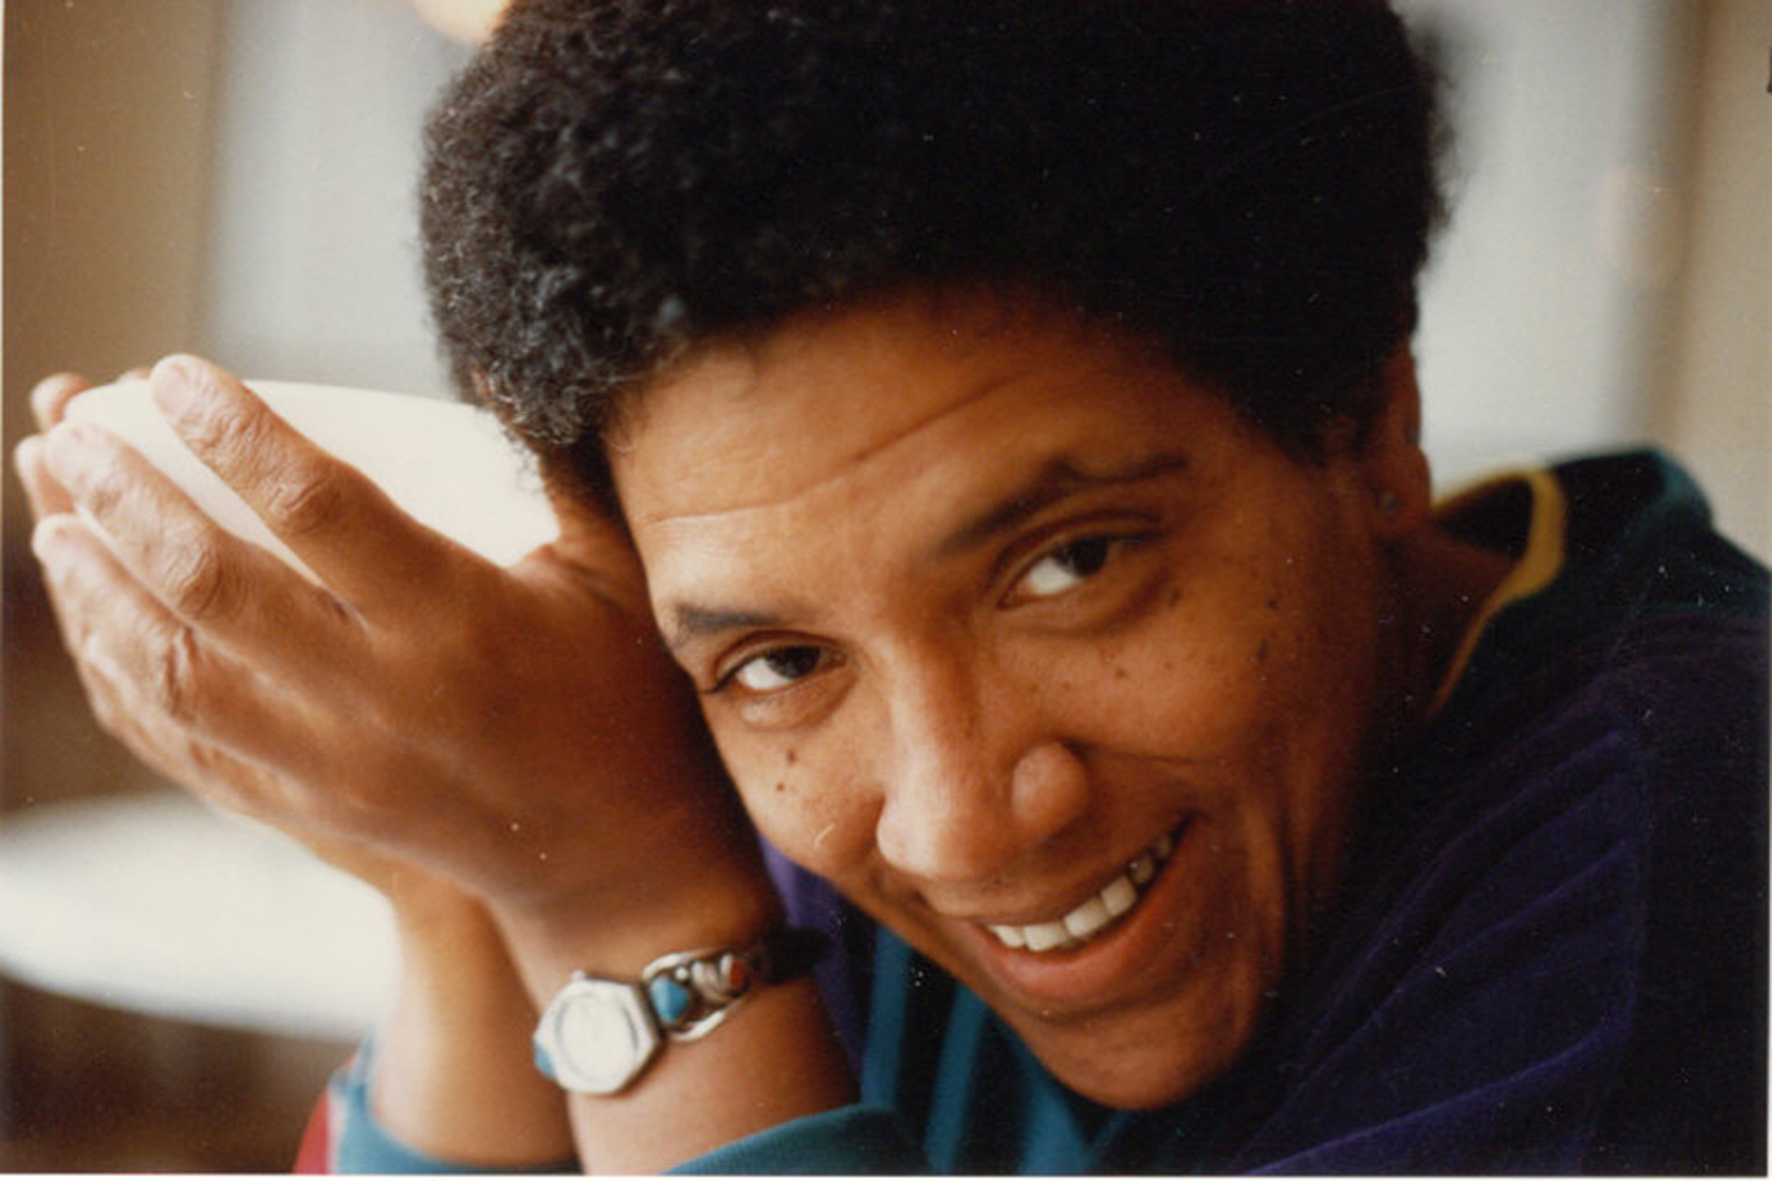 “Power” by Audre Lorde